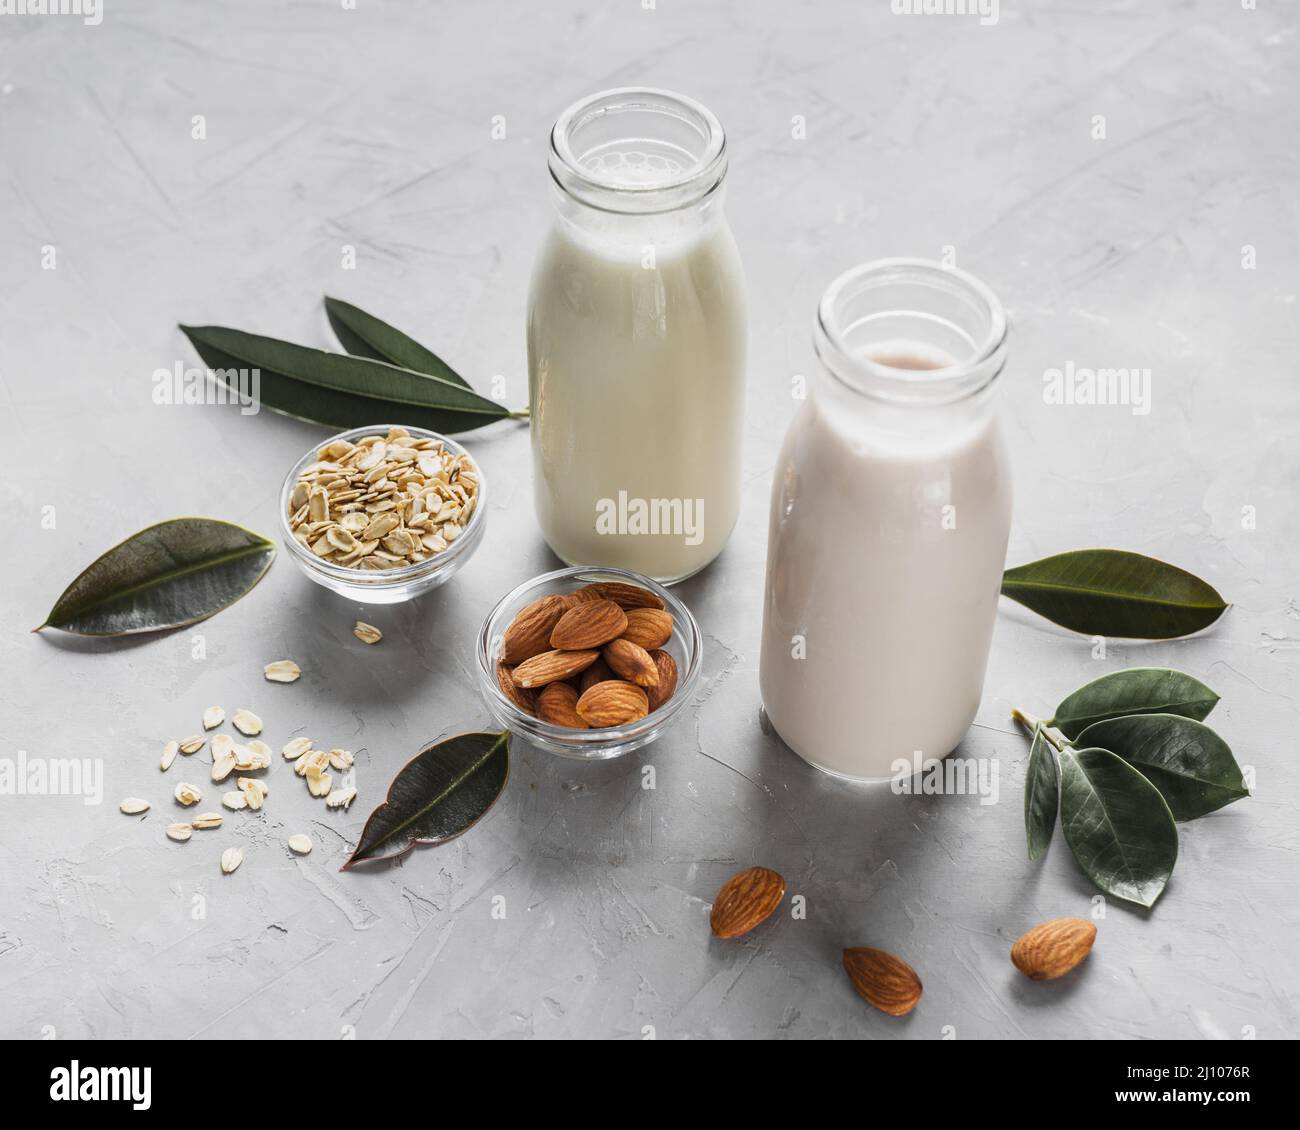 High angle milk bottles with almonds oats Stock Photo